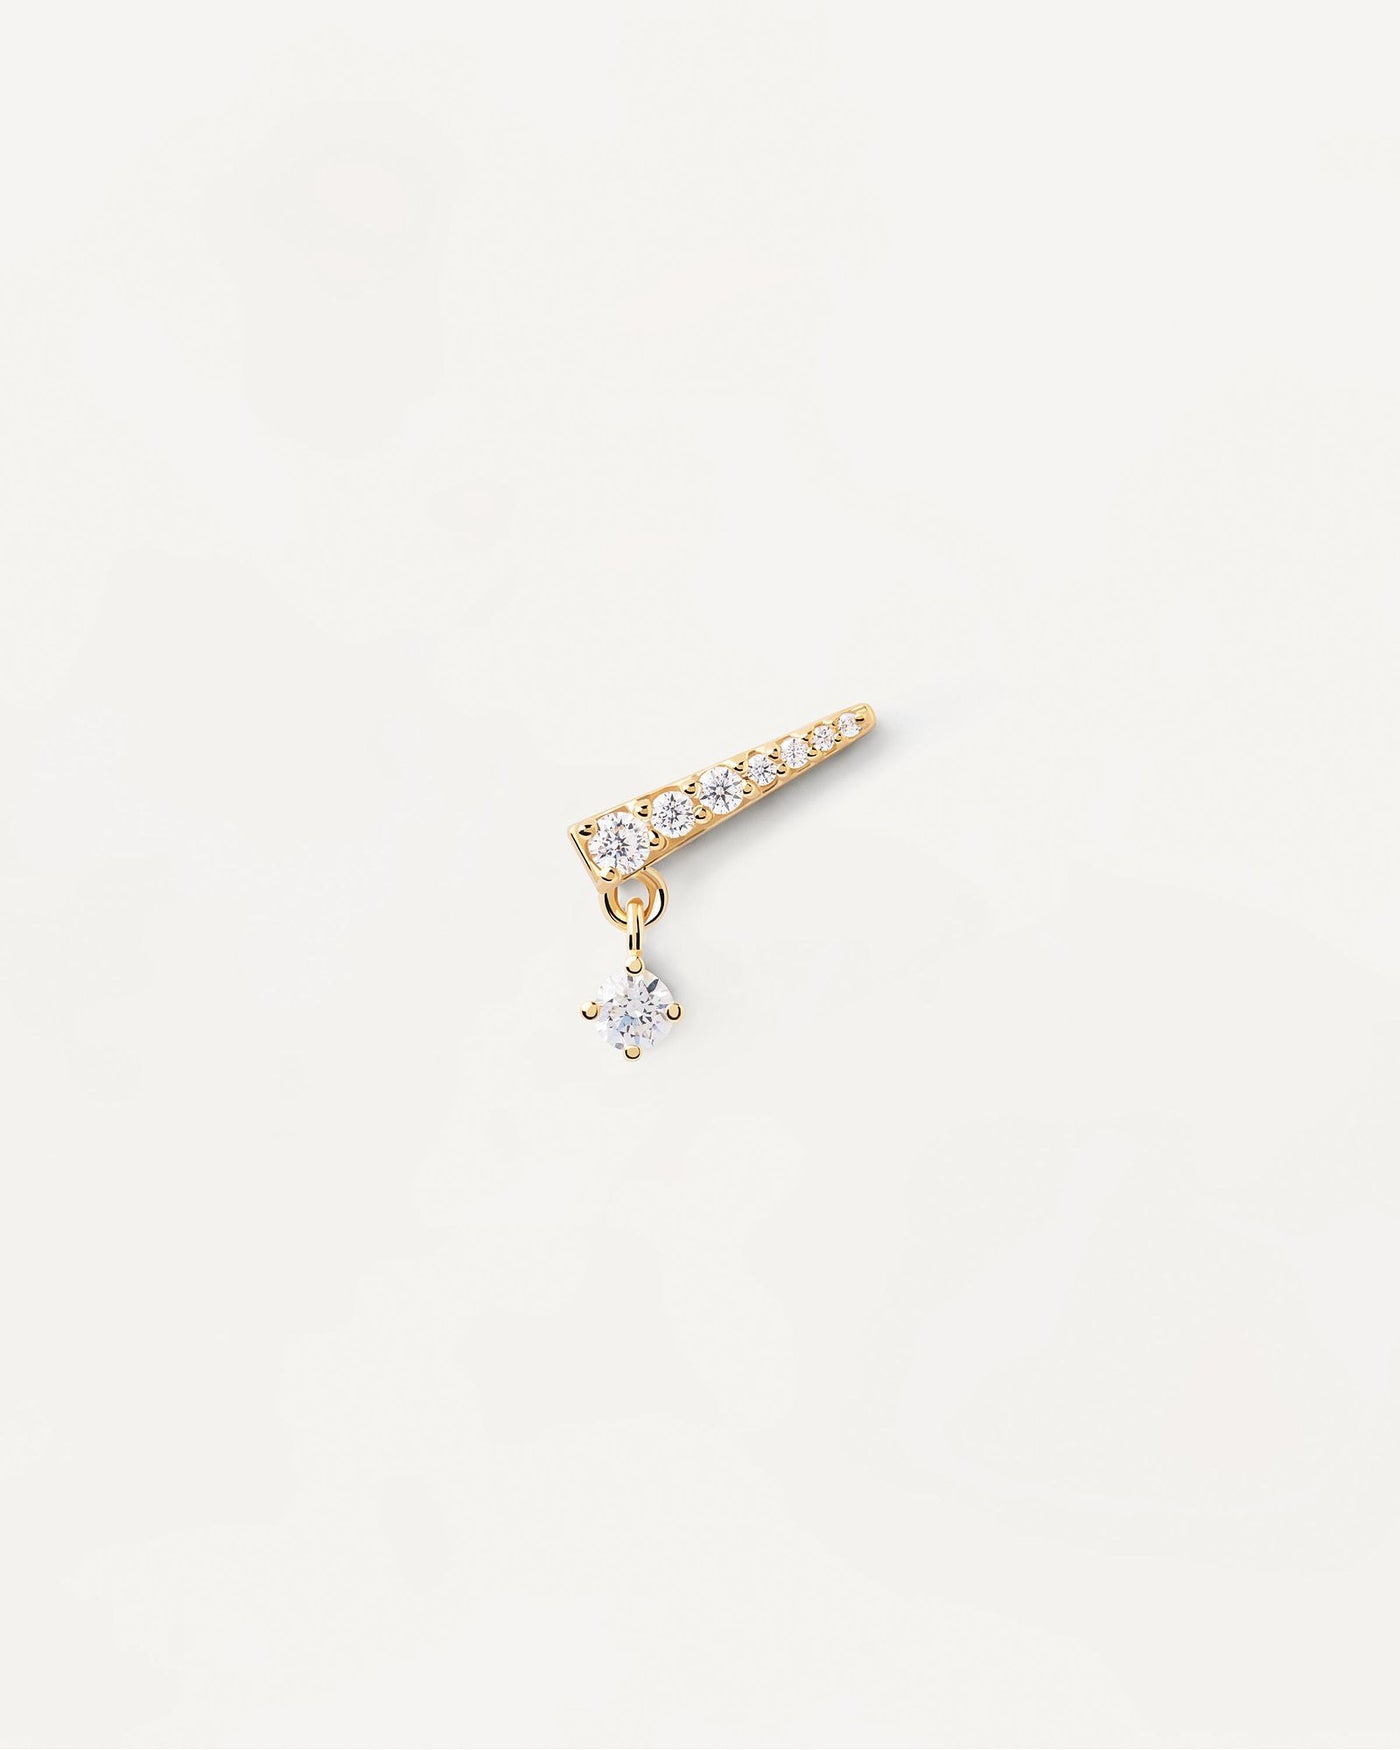 2024 Selection | Ava Single Earring. Gold-plated ear piercing in point shape with white zirconia. Get the latest arrival from PDPAOLA. Place your order safely and get this Best Seller. Free Shipping.